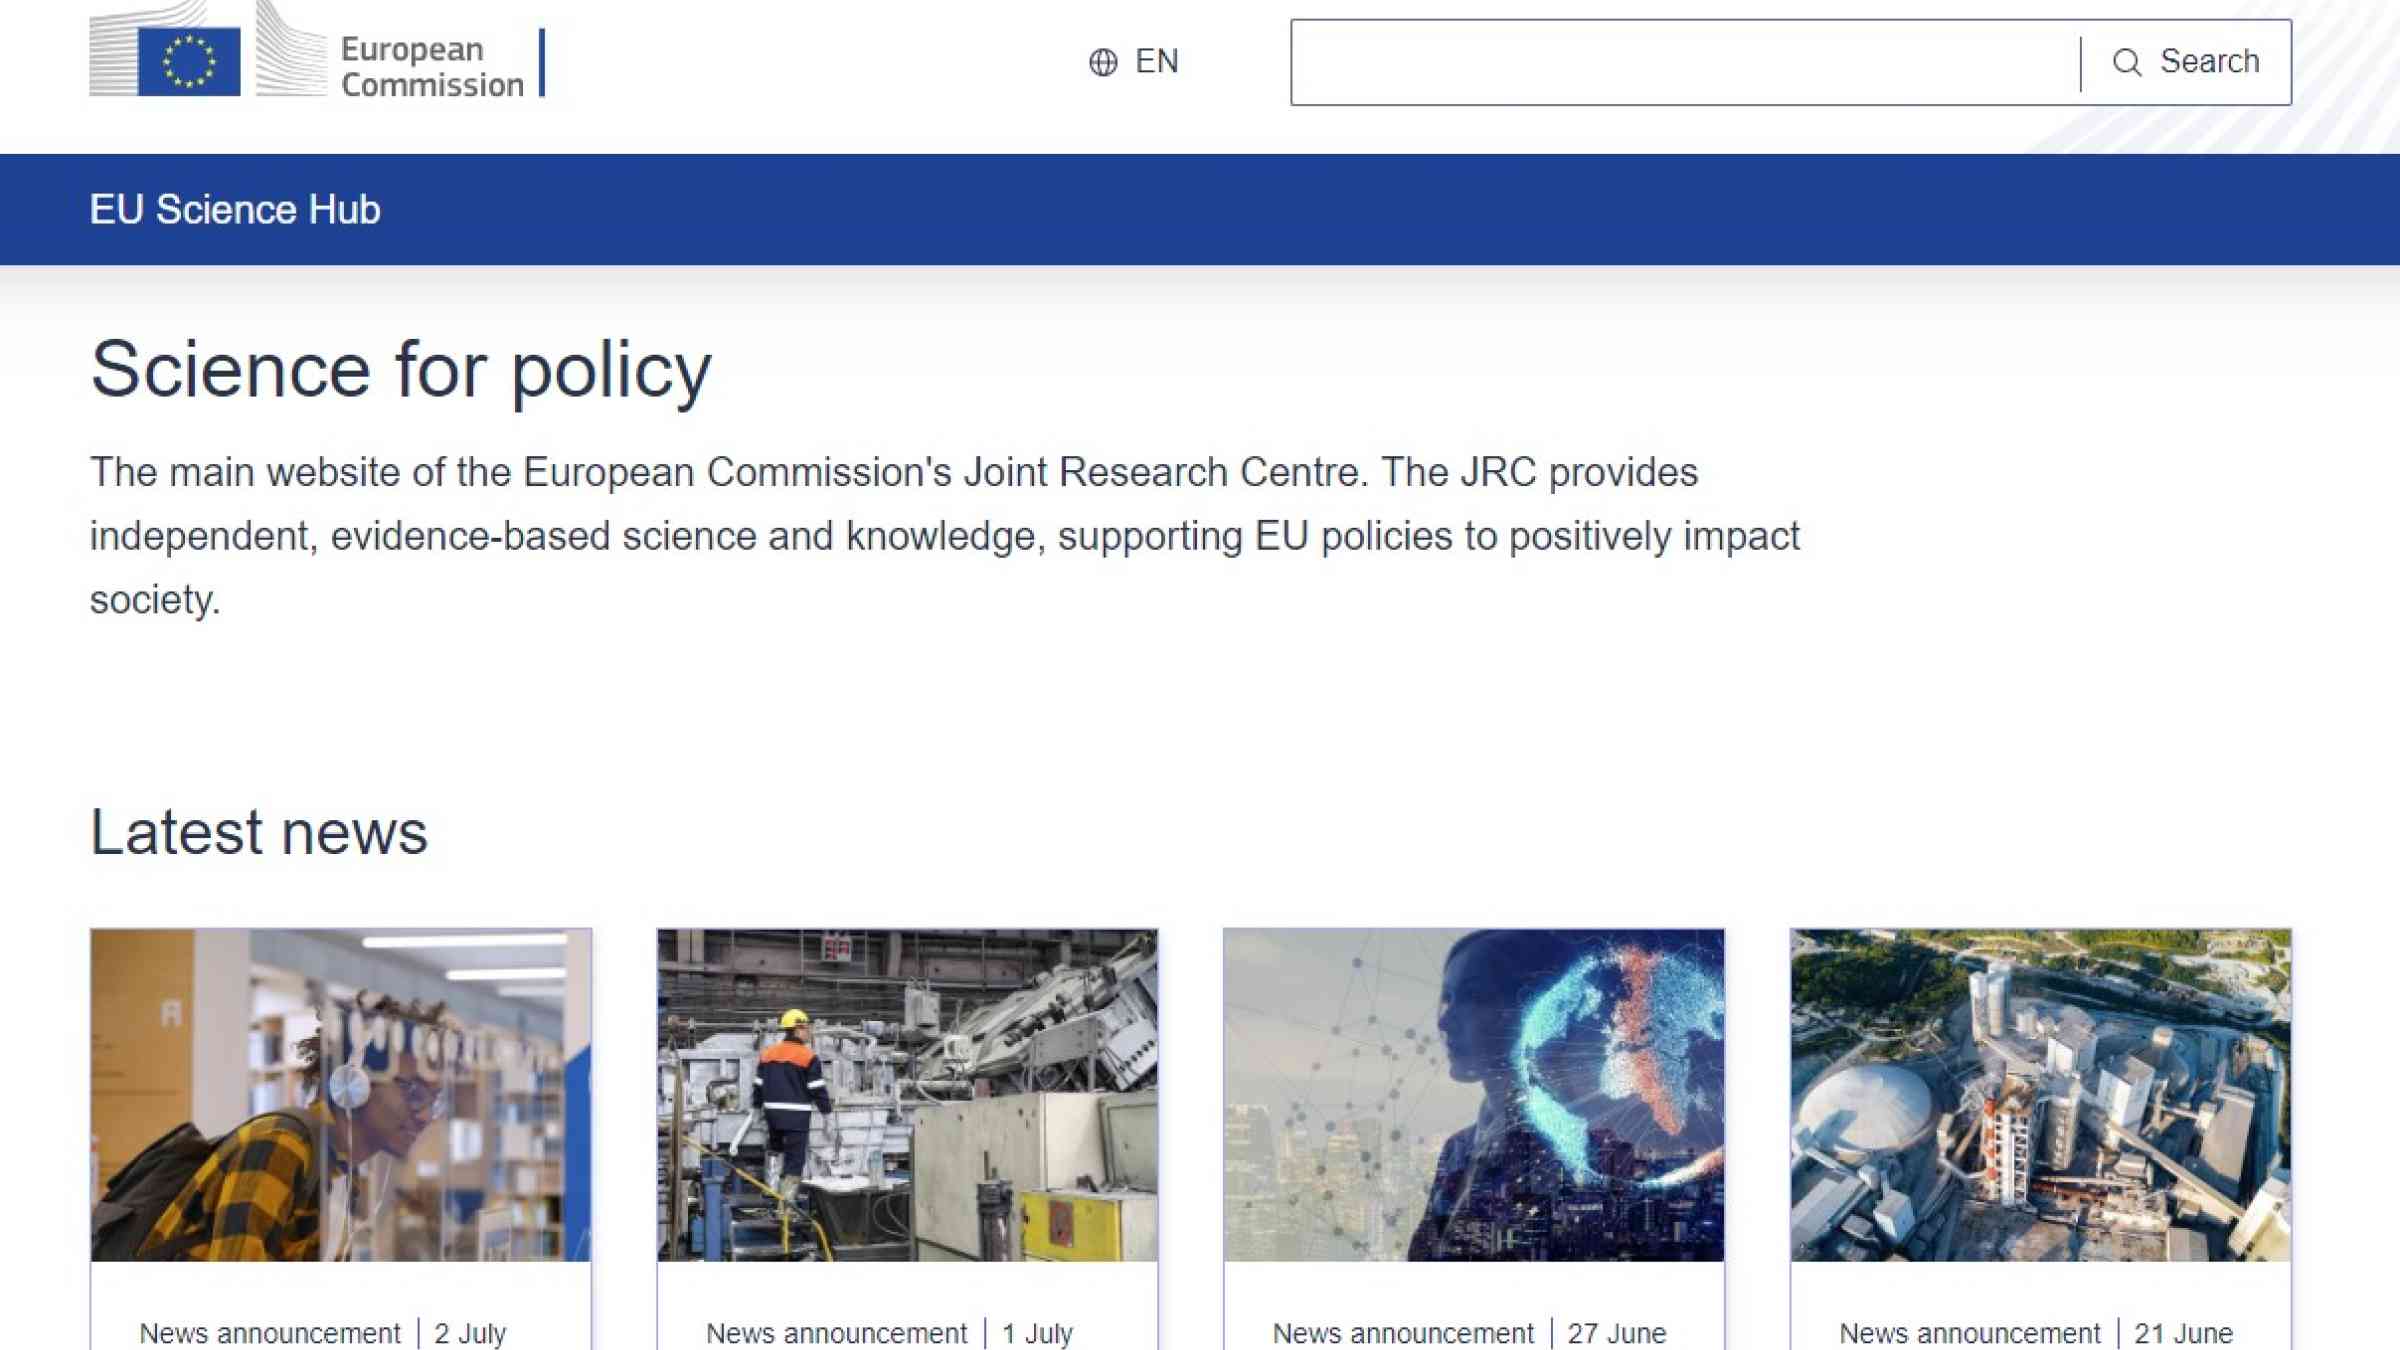 Screenshot of the European Commission's Joint Research Centre